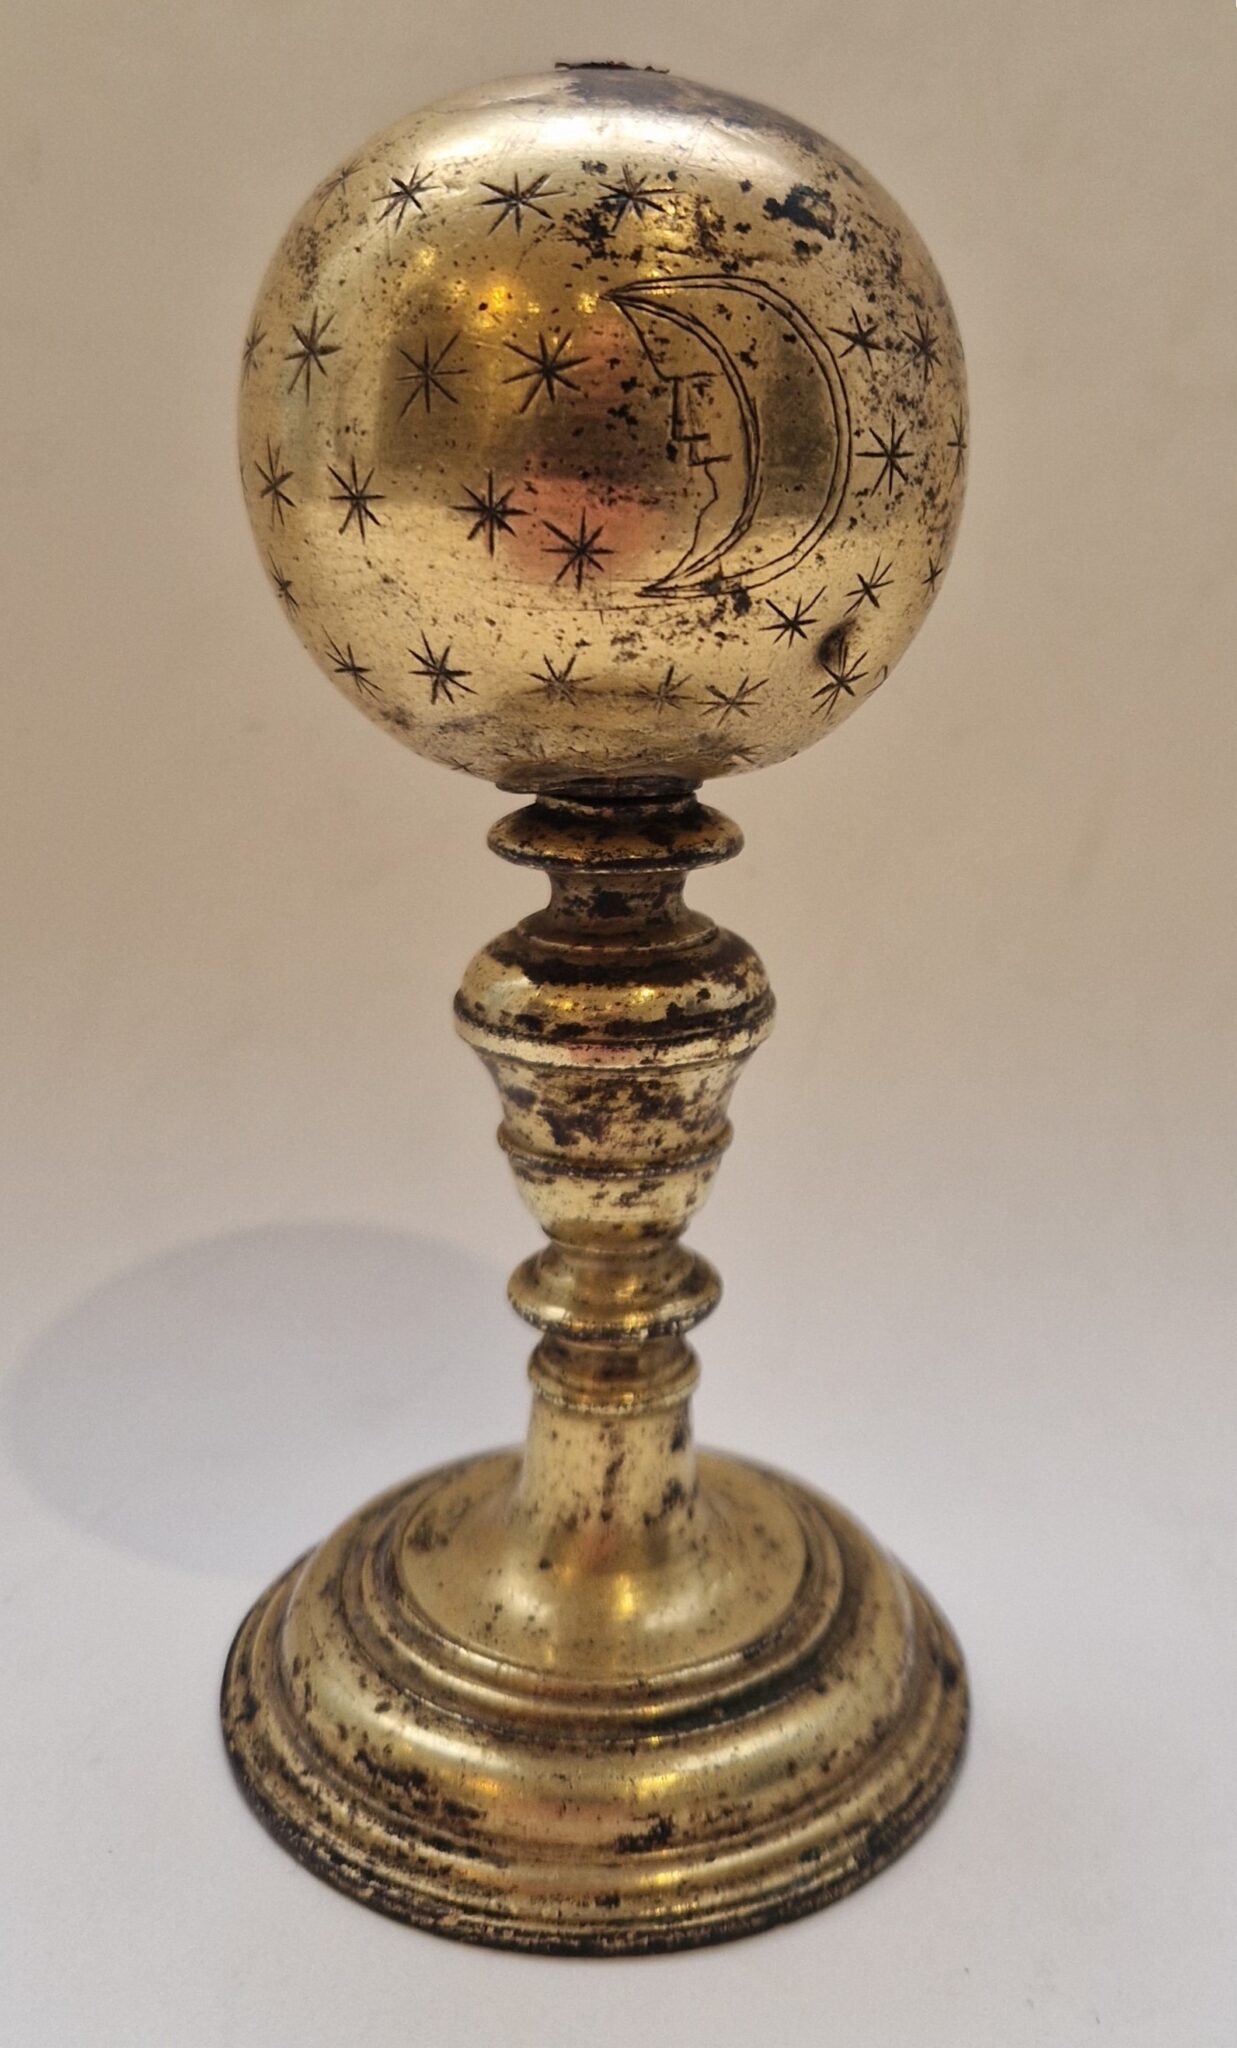 A gilded bronze globe for a celestial sphere – 17th century